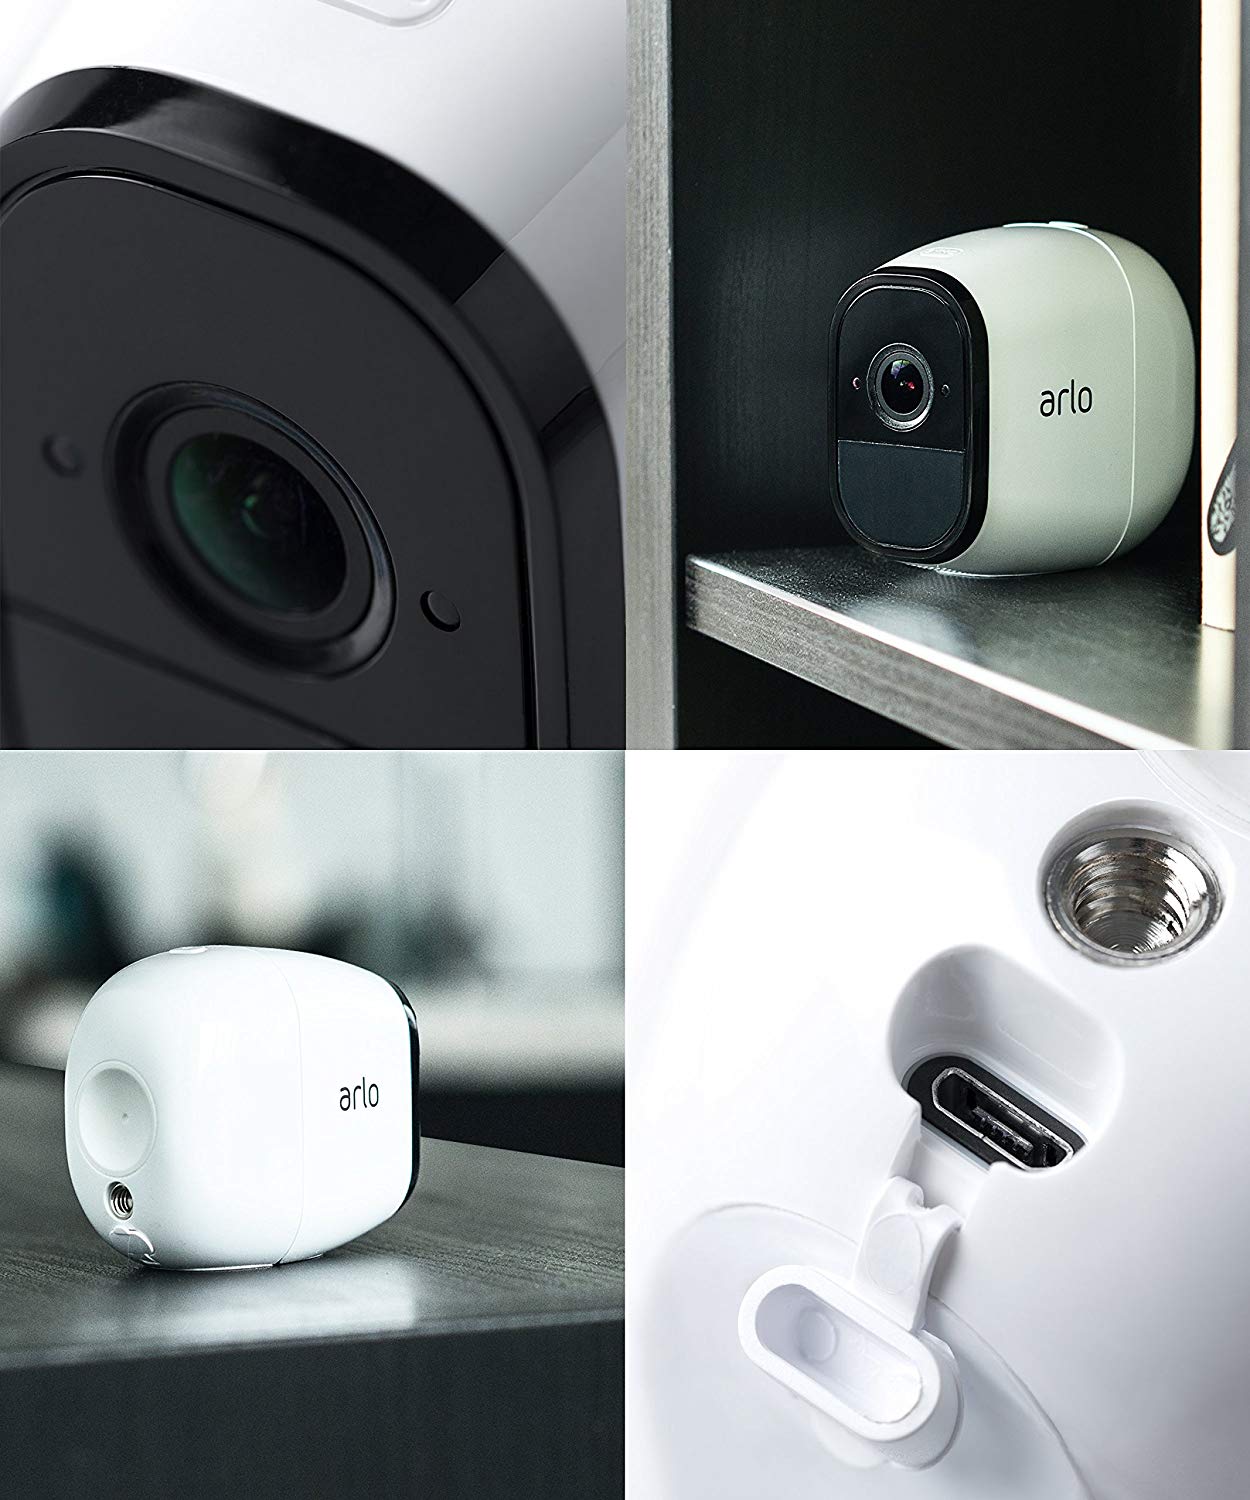 Arlo Pro Wireless Security Camera On Sale for 48% Off [Lowest Price Ever]